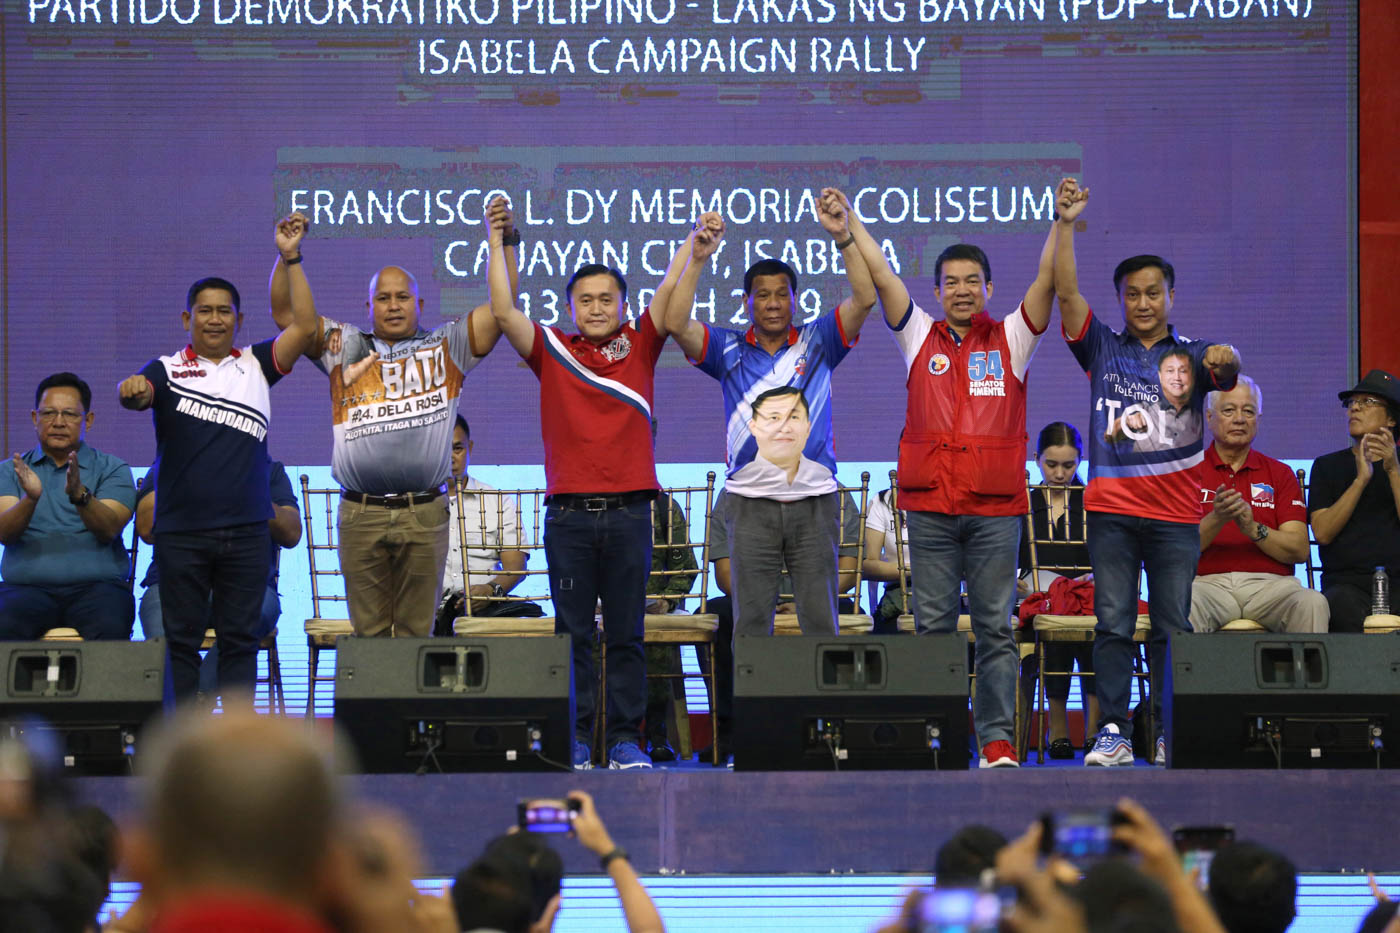 PDP 5. President Rodrigo Duterte raises the hands of the 5 senatorial candidates of his official party, PDP-Laban – (from left) Mangudadatu, Dela Rosa, Go, Pimentel, Tolentino – at the F. L. Dy Memorial Coliseum in Cauayan City, Isabela, on March 13, 2019. Malacañang photo